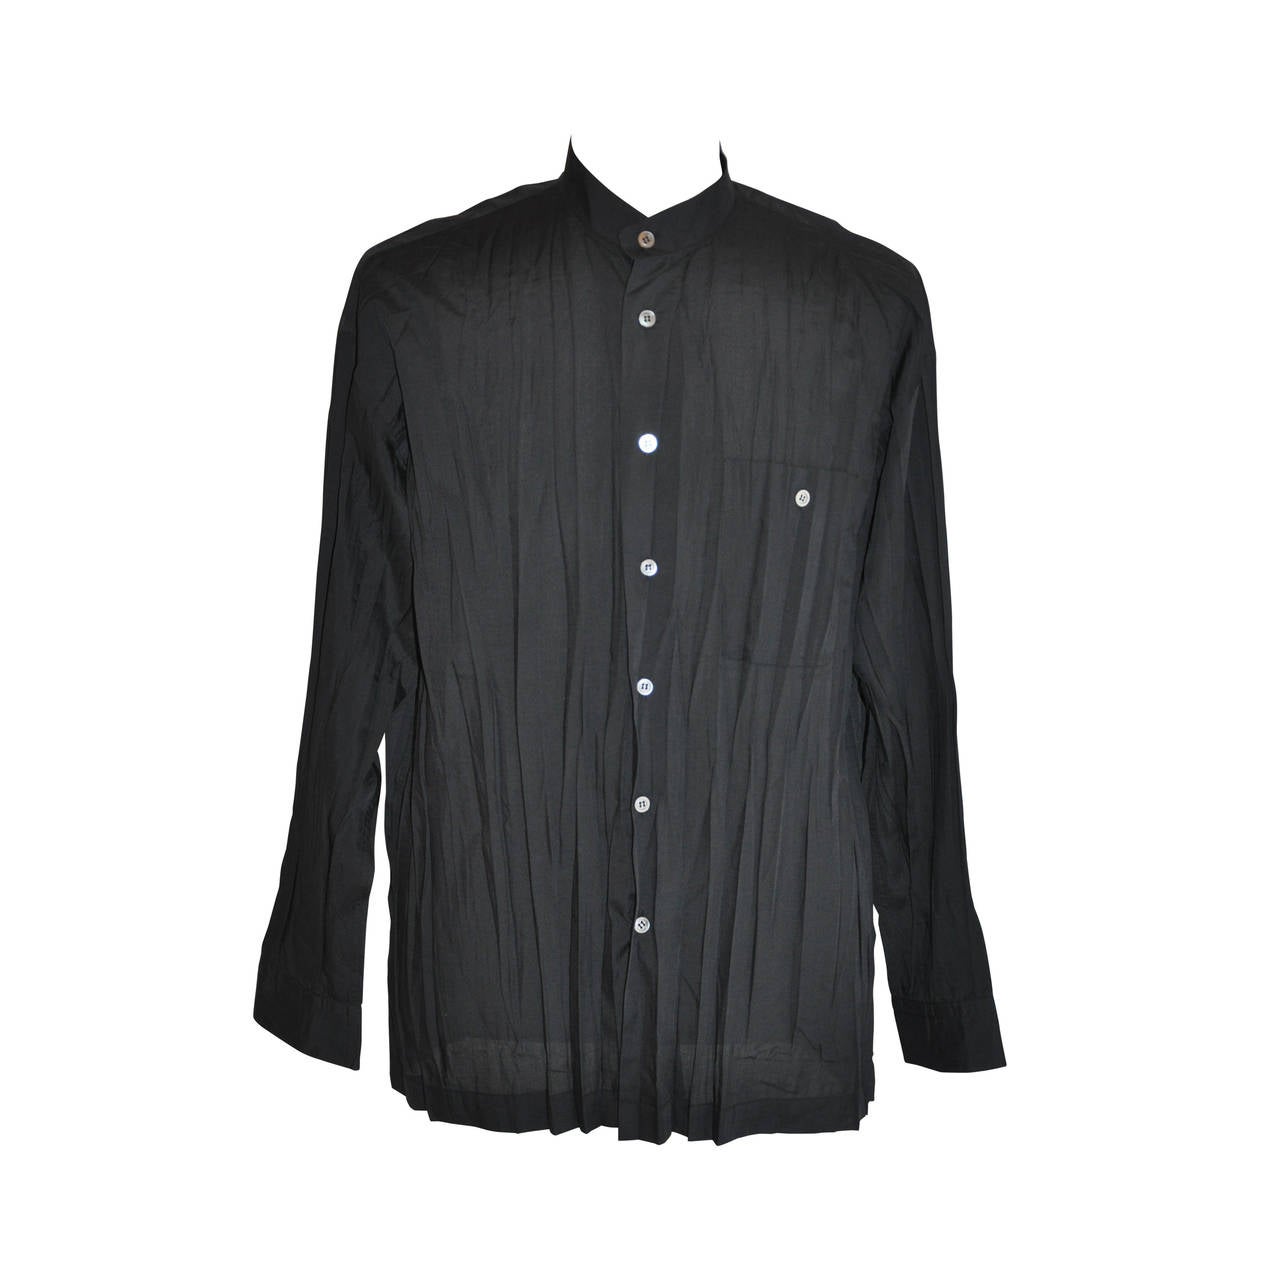 Issey Miyake Men's Black Accordian Shirt with Mother-of-Pearl Accent